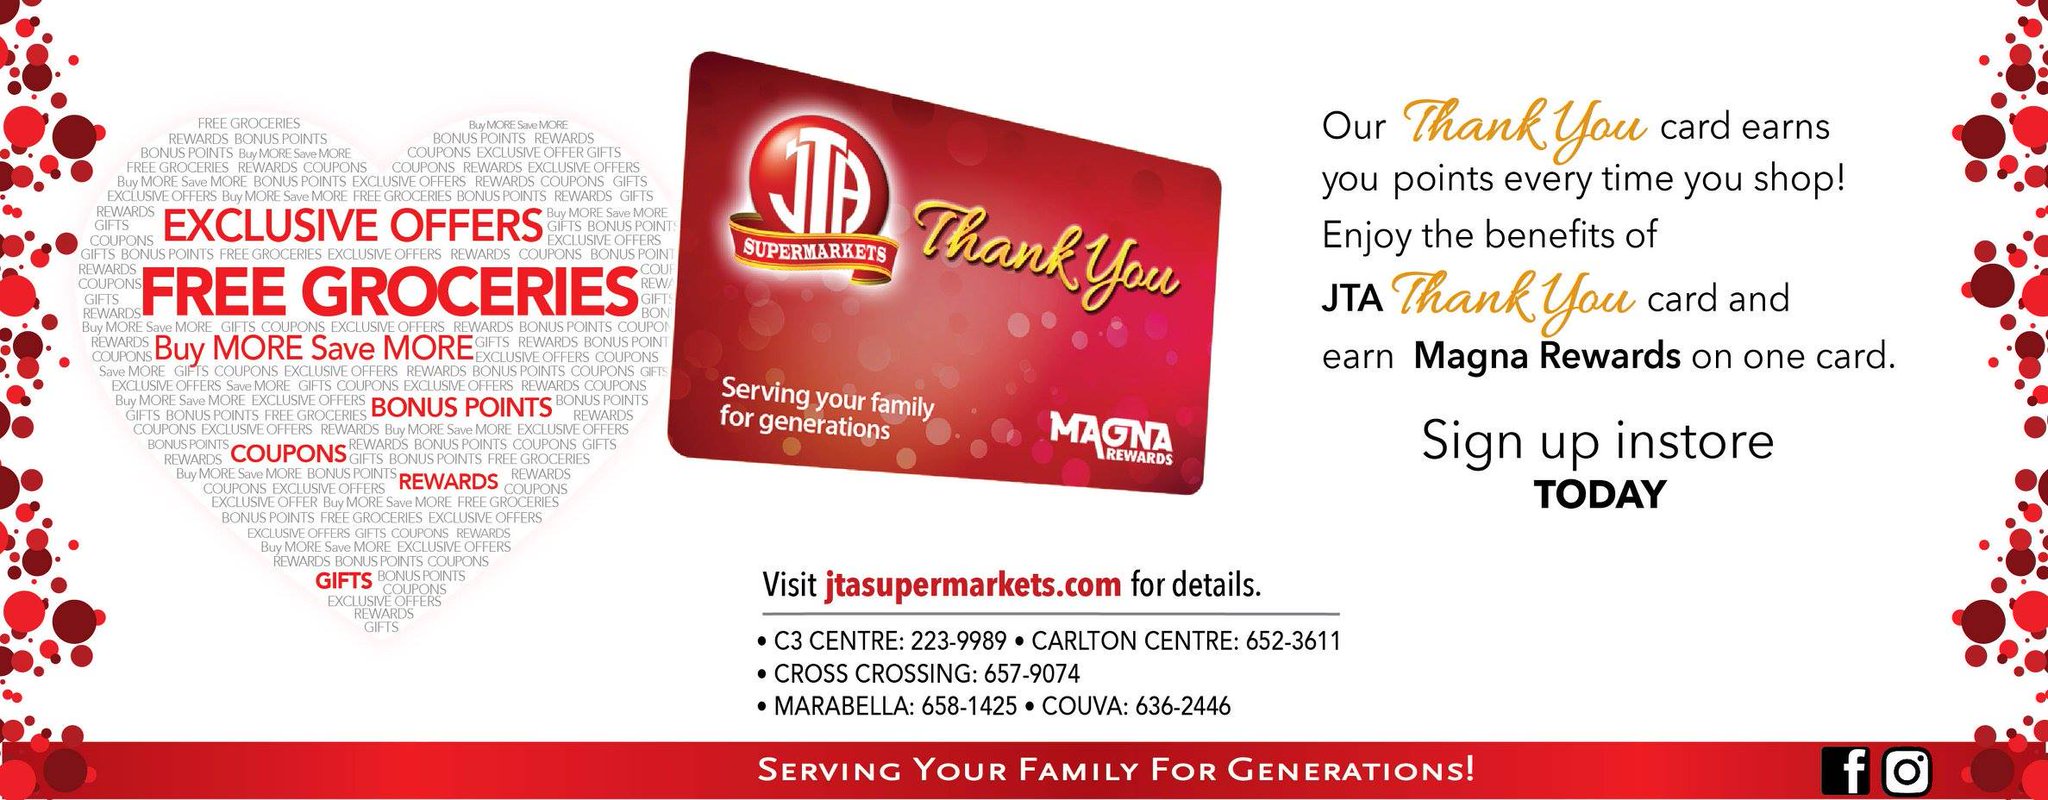 C3centre Have You Signed Up For The Jta Supermarkets Thank You Card You Sign Up At Any Branch Including The One Here At C3 Jtasupermarkets T Co Xx3rit2shu